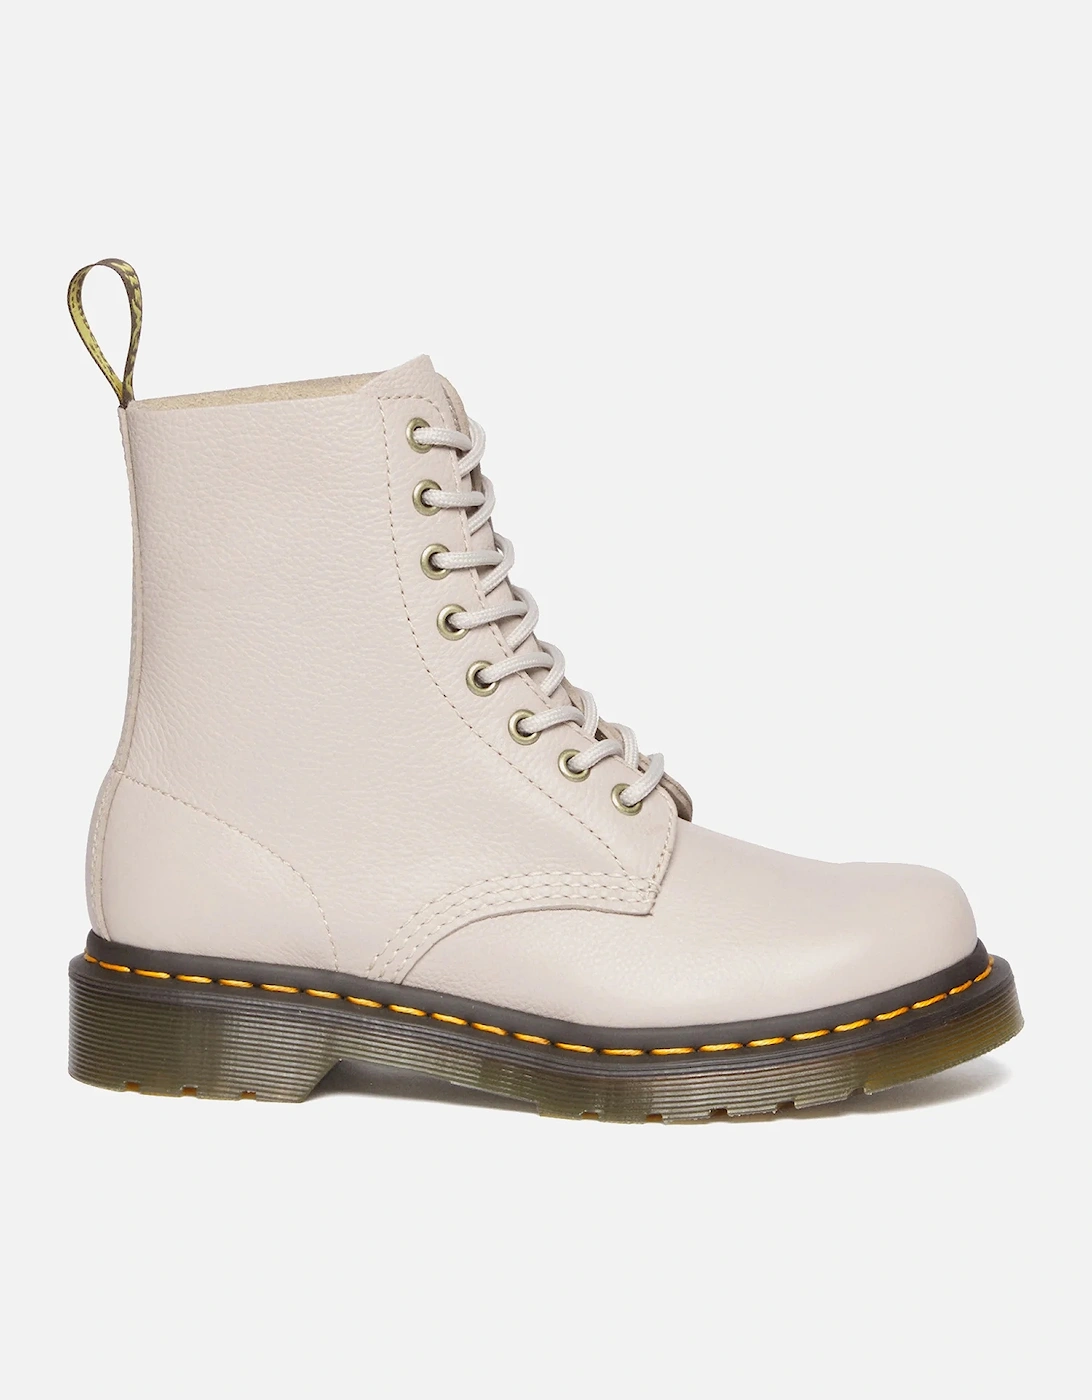 Dr. Martens Women's 1460 Pascal Virginia Leather 8-Eye Boots - Dr. Martens - Home - Women's Shoes - Women's Boots - Dr. Martens Women's 1460 Pascal Virginia Leather 8-Eye Boots, 2 of 1